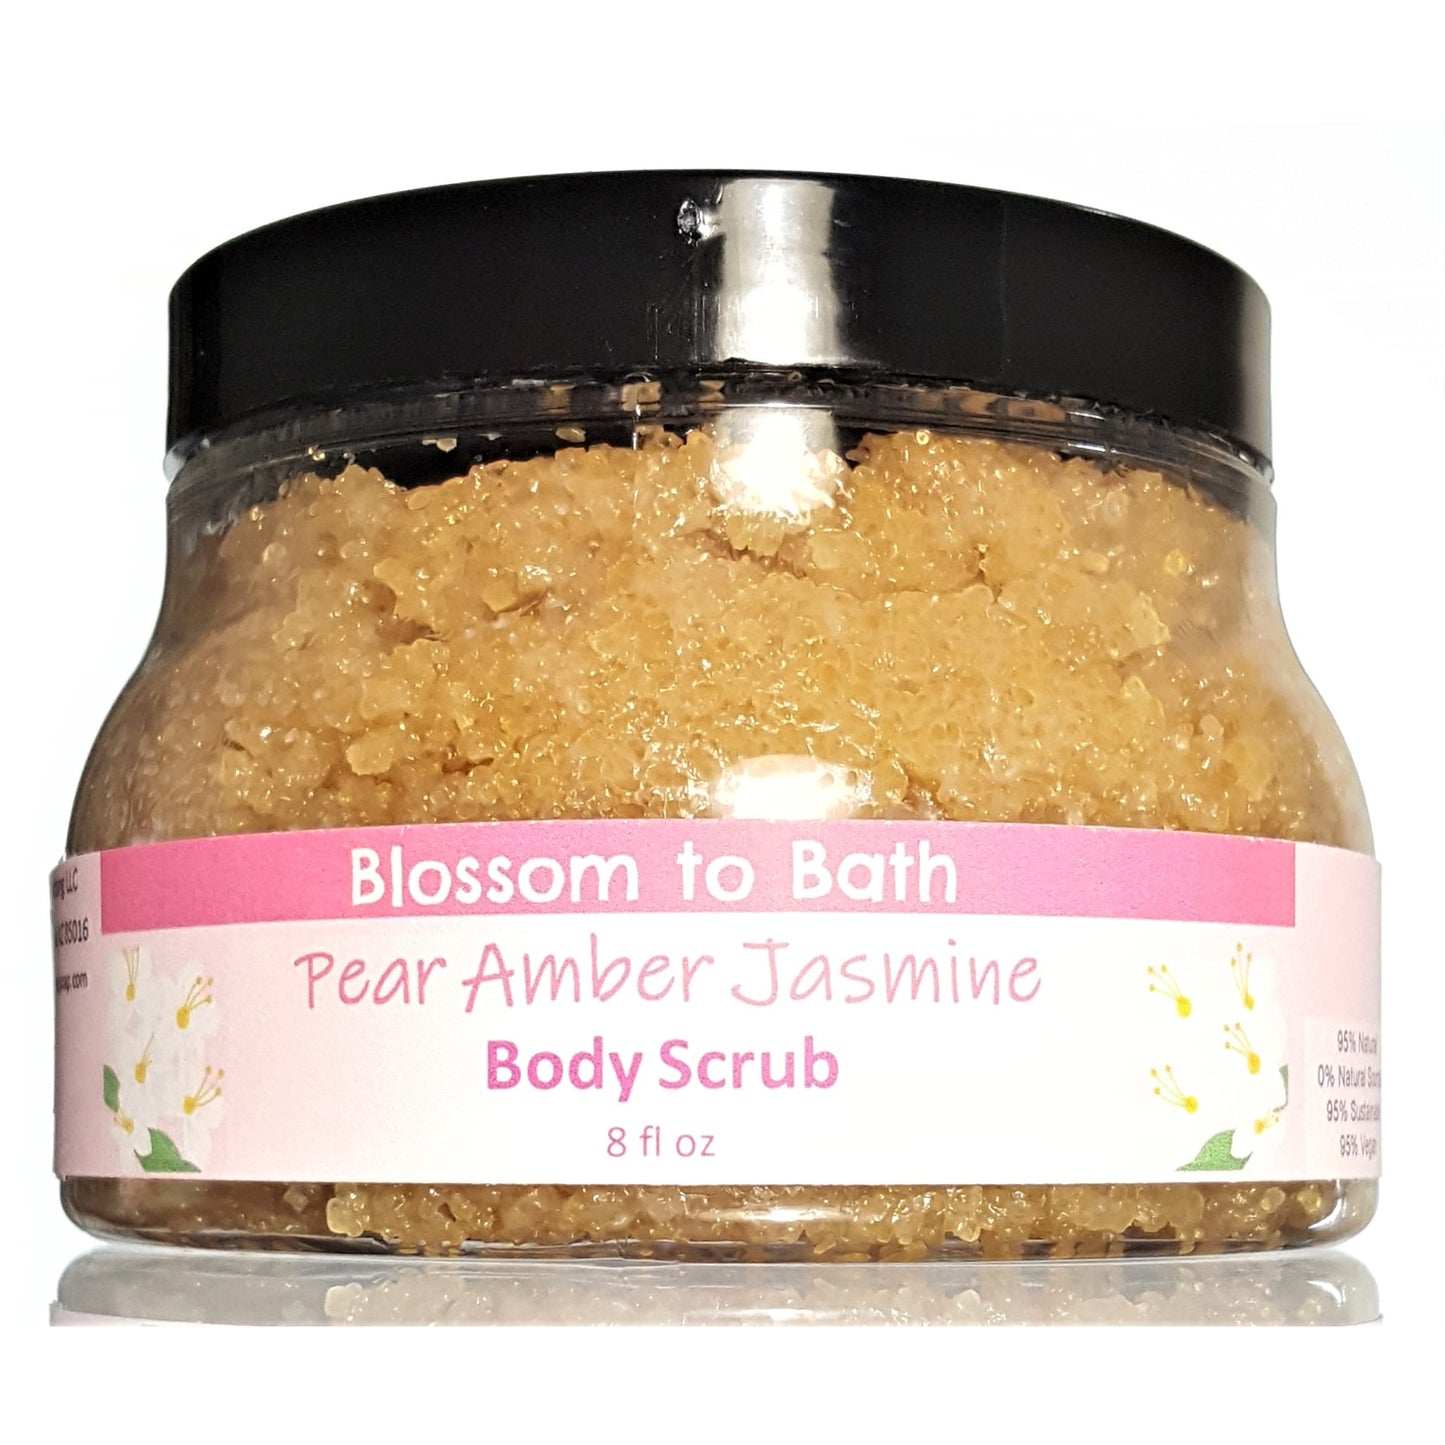 Buy Blossom to Bath Pear Amber Jasmine Body Scrub from Flowersong Soap Studio.  Large crystal turbinado sugar plus  rich oils conveniently exfoliate and moisturize in one step  A scent that lets you escape to an island paradise of pear, jasmine, and warm spices.